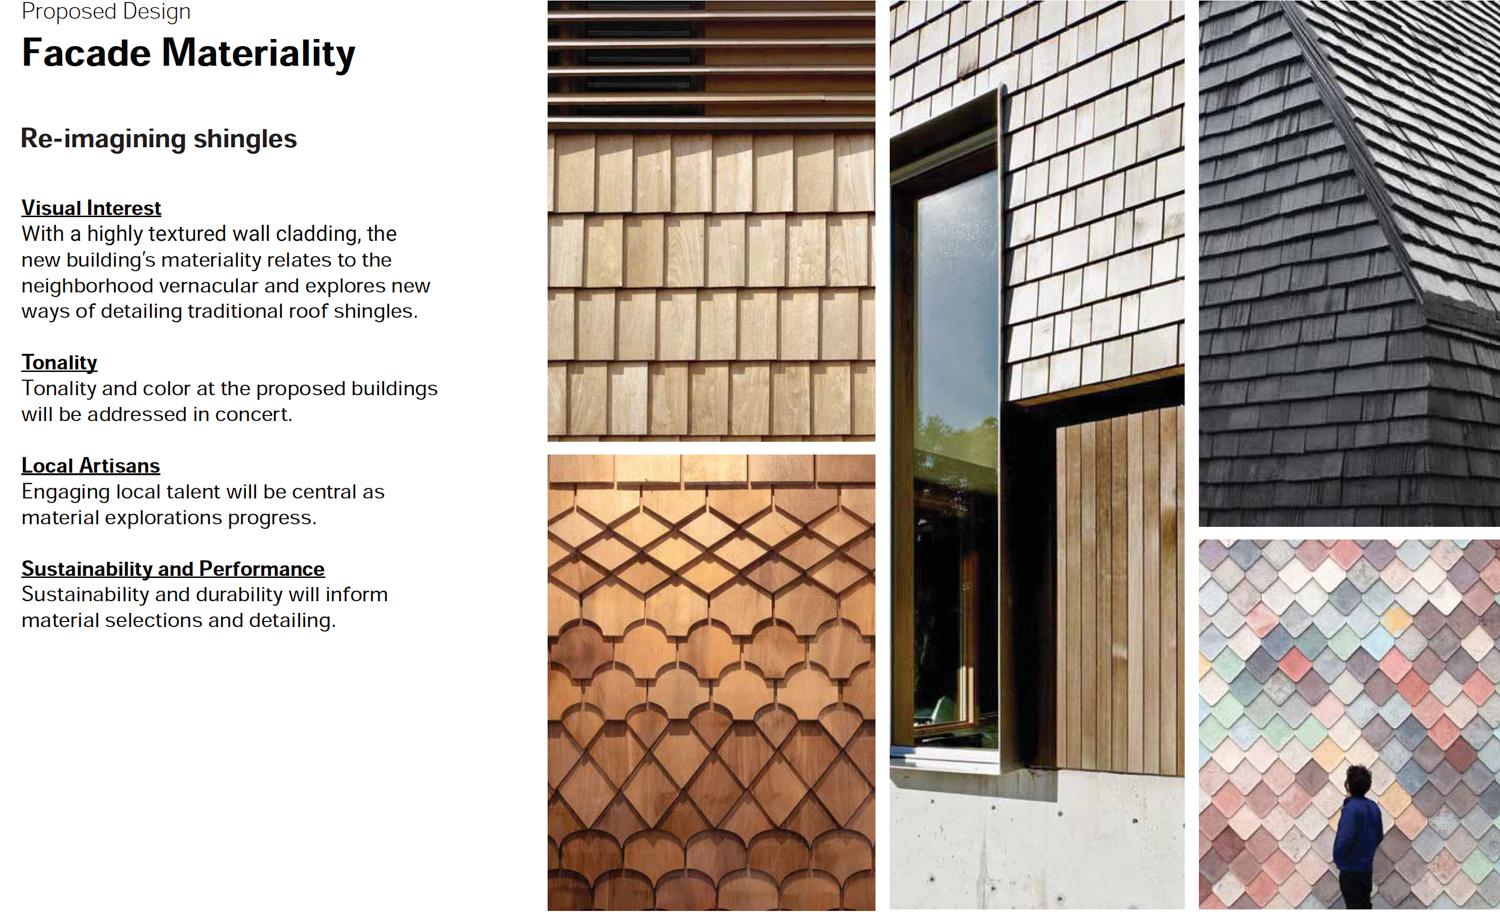 2471 and 2477 Washington Street facade material breakdown, compilation by Jensen Architects